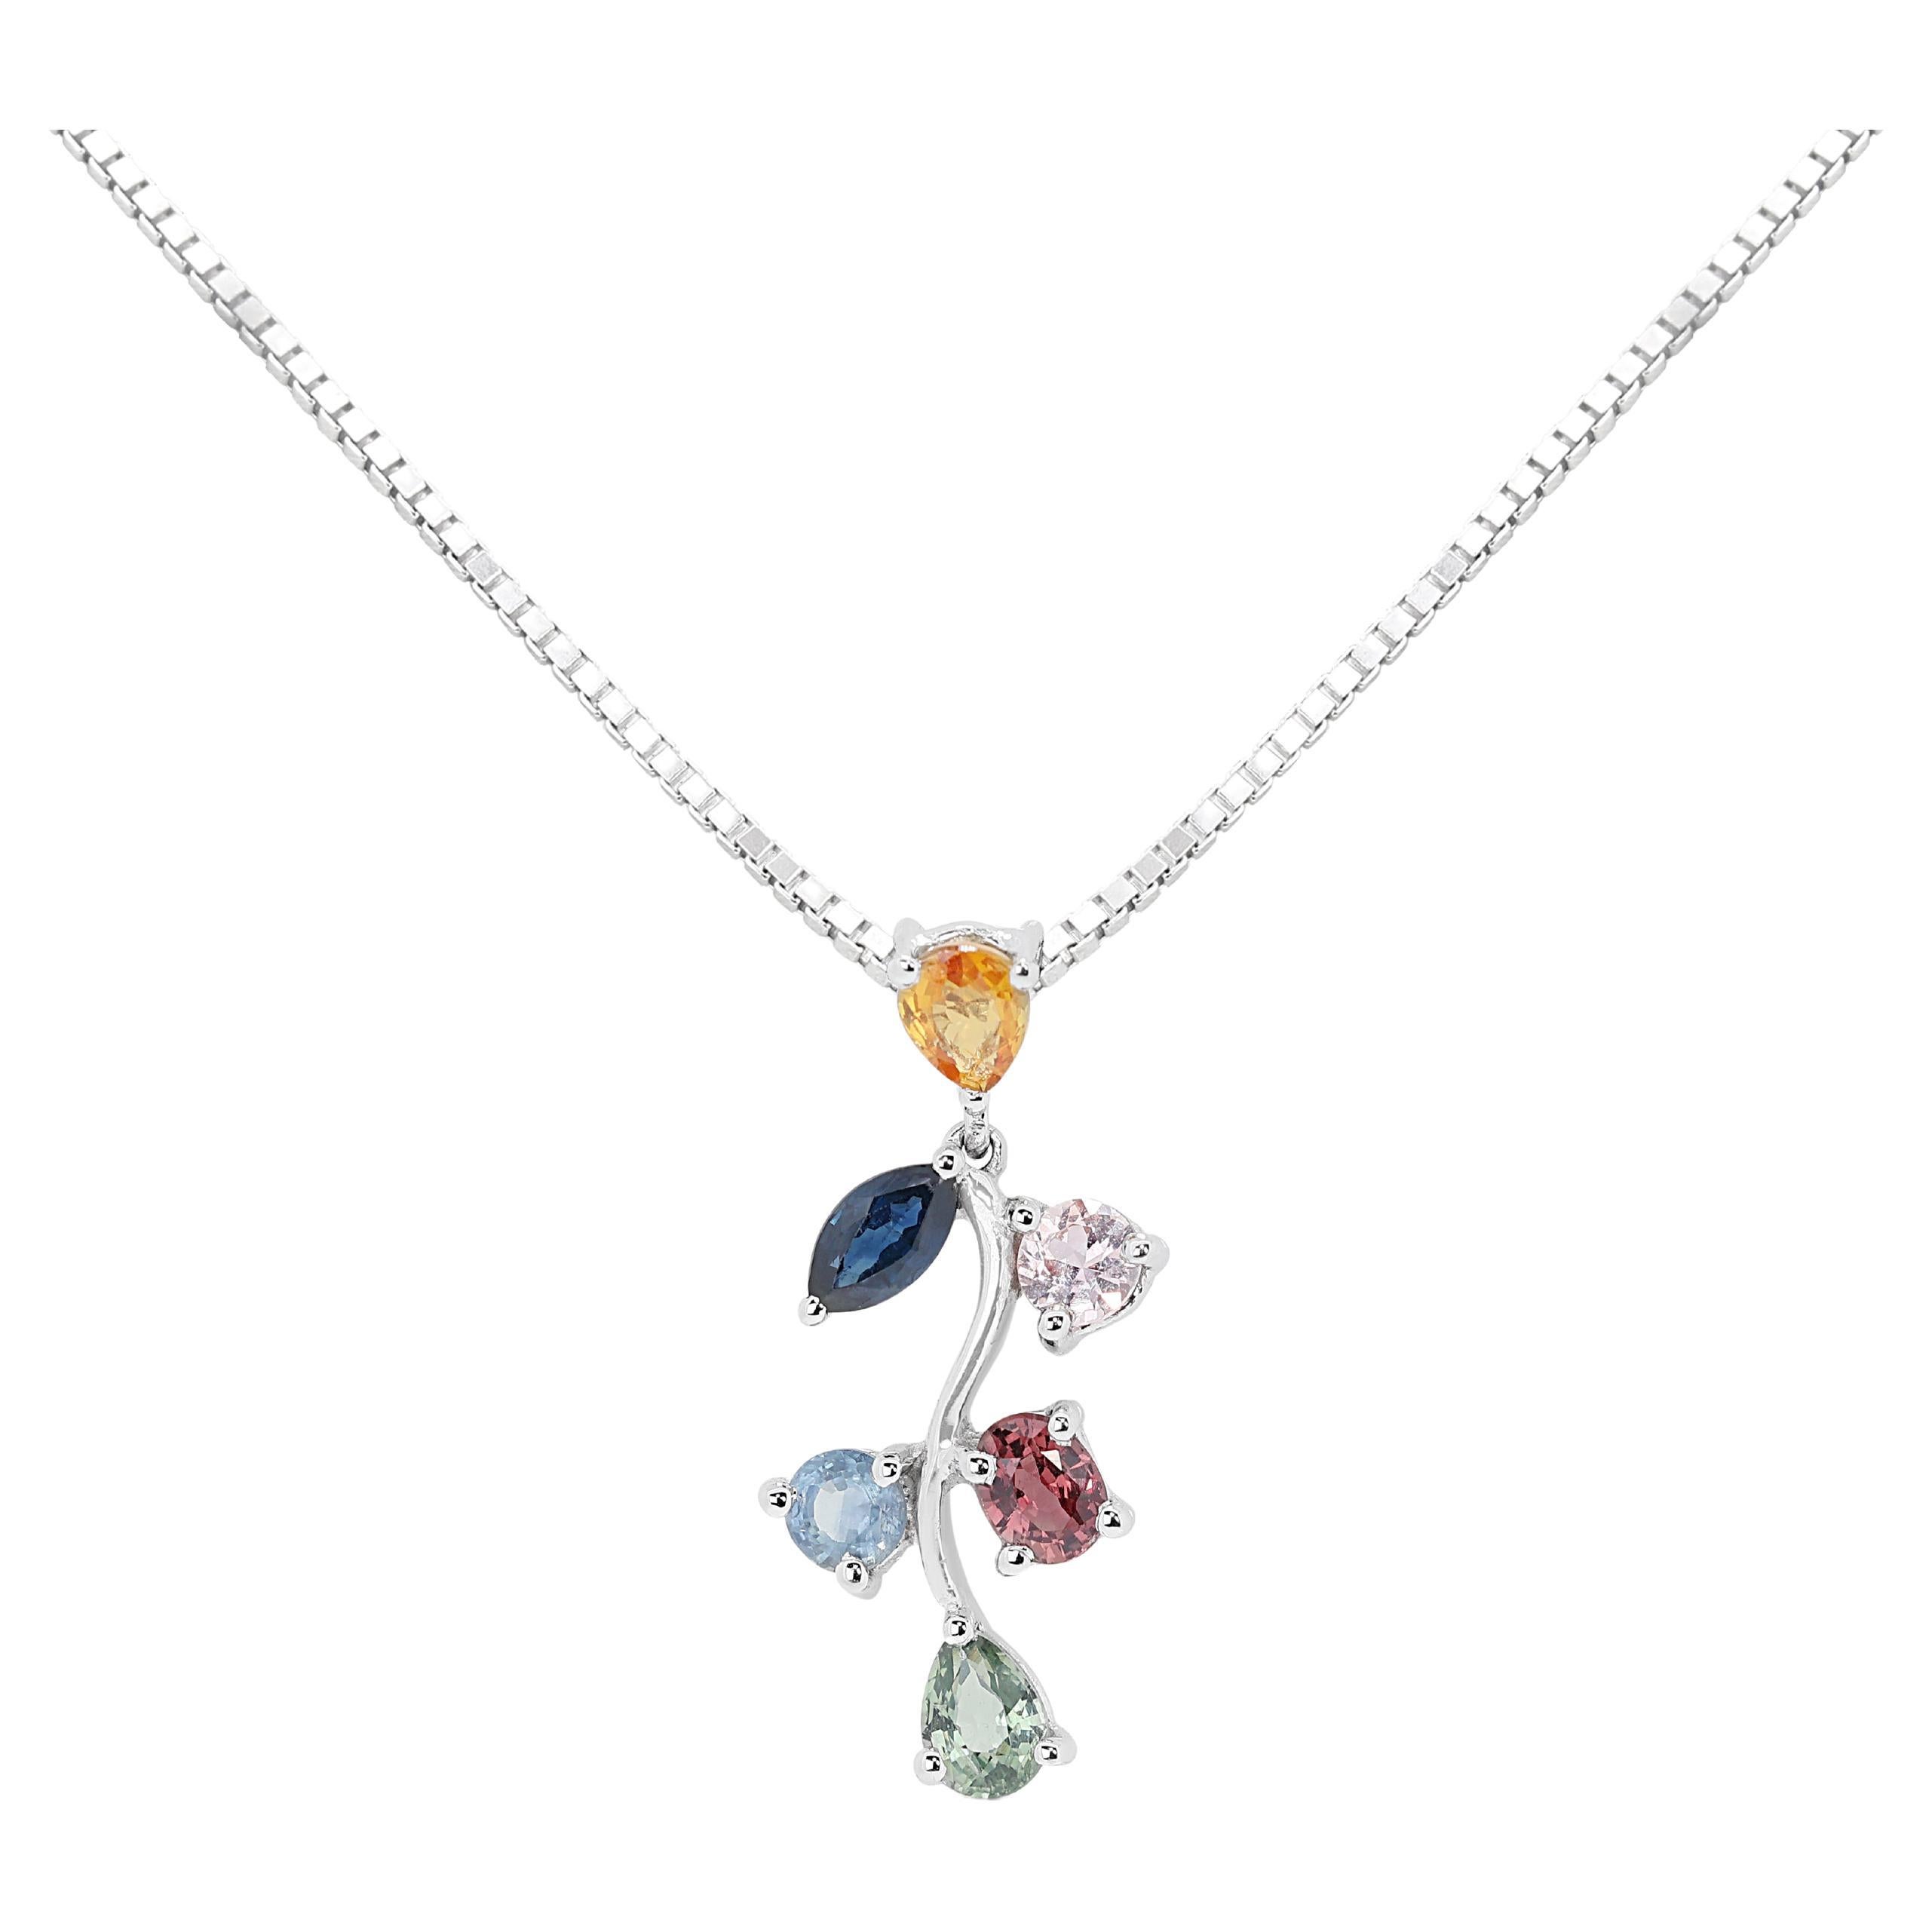 Captivating 0.70ct Multi-Colored Sapphires Pendant - (Chain Not Included) For Sale